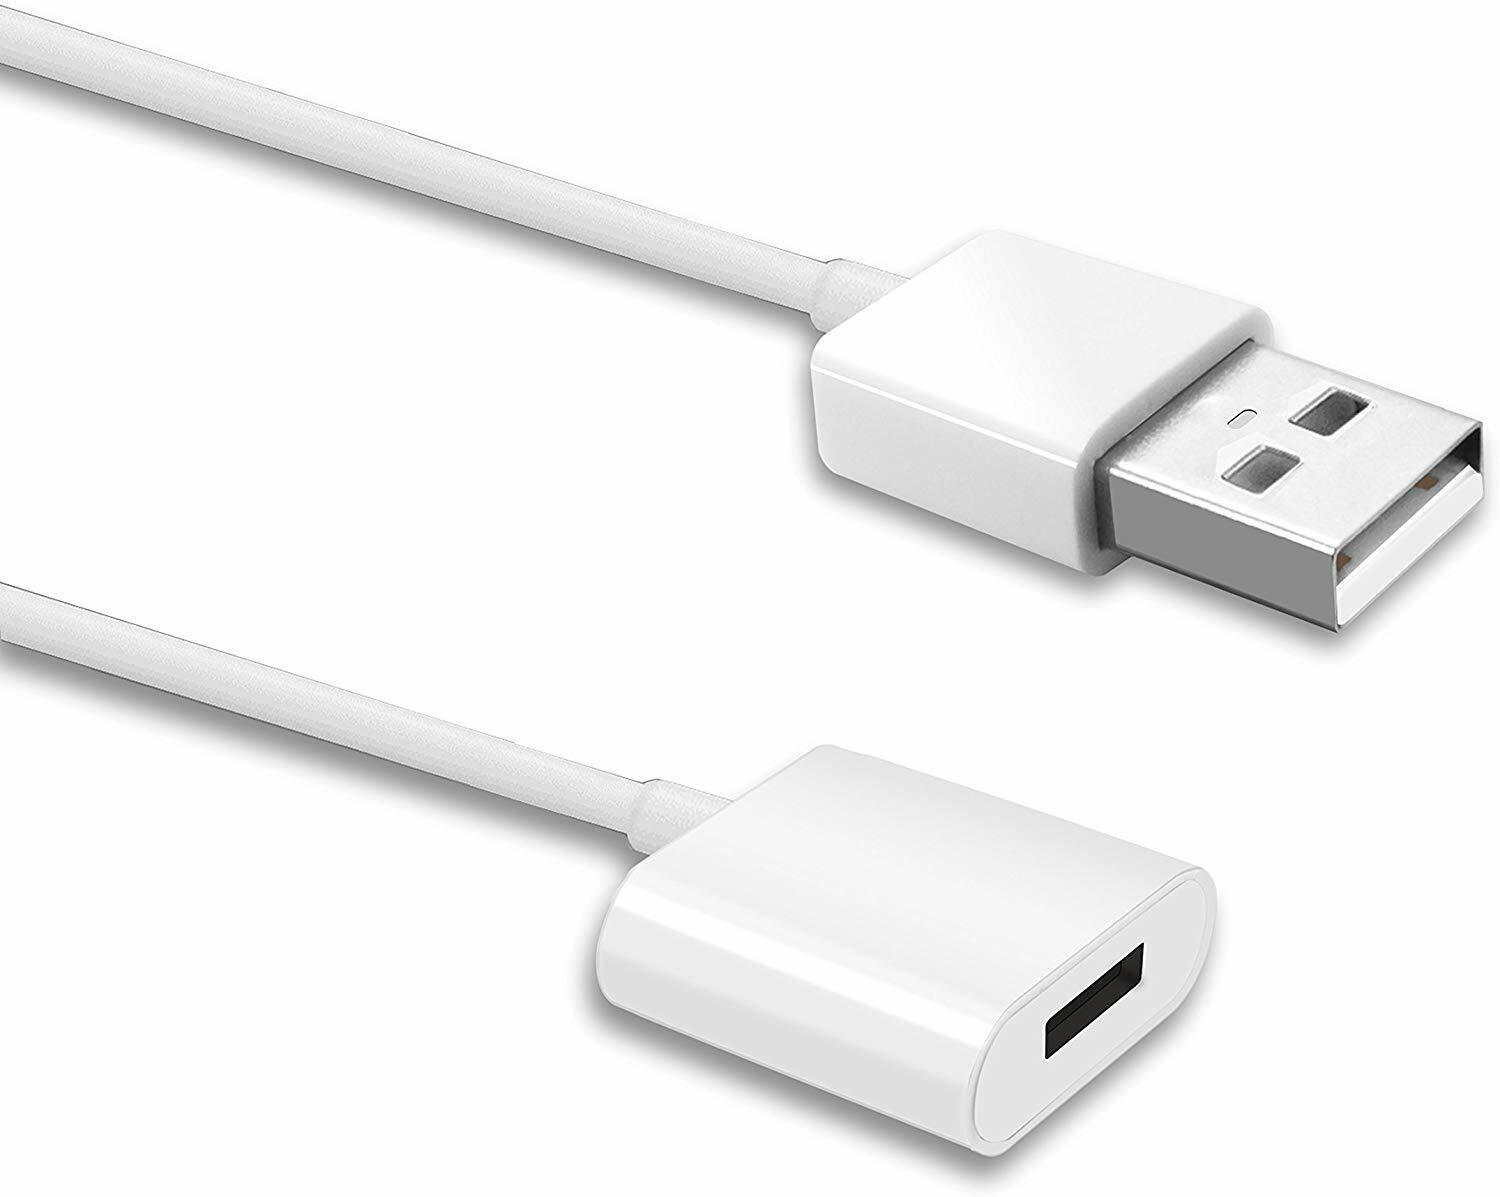 TechMatte Flexible Charging Adapter Cable for Apple Pencil (5 Feet, White)